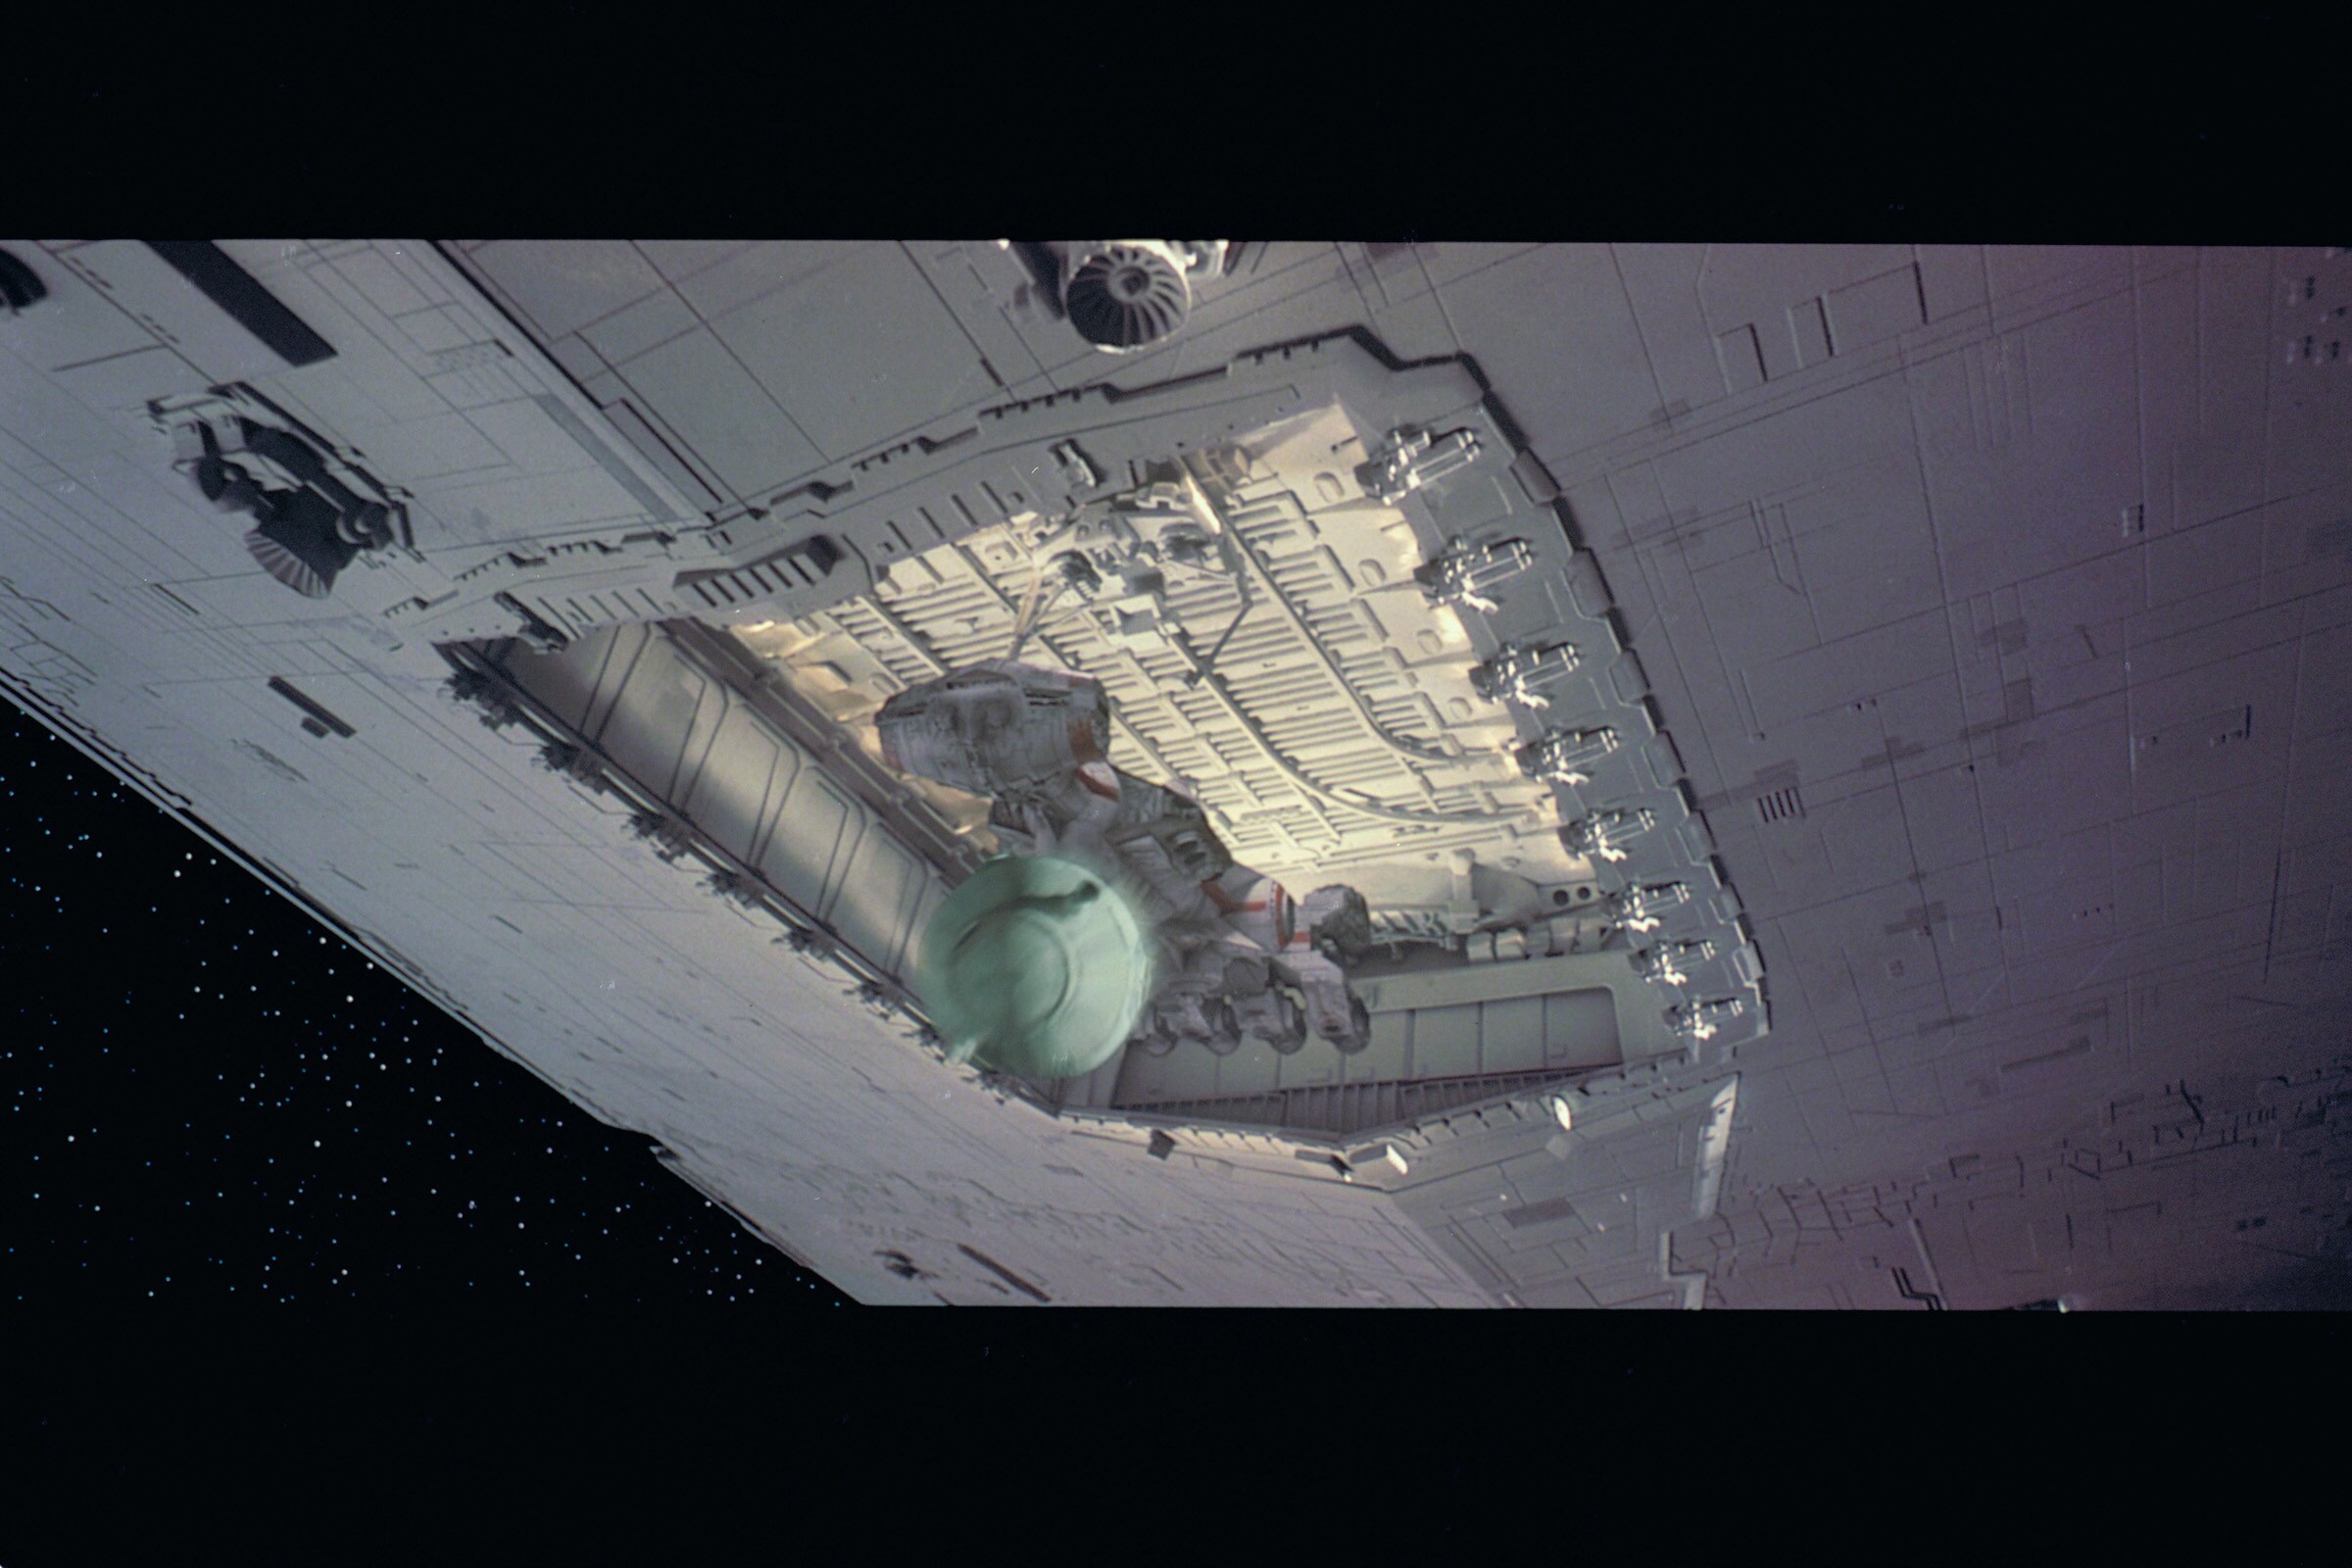 The Star Destroyer Relentless features more detailed tractor beam projectors in this episode to m...